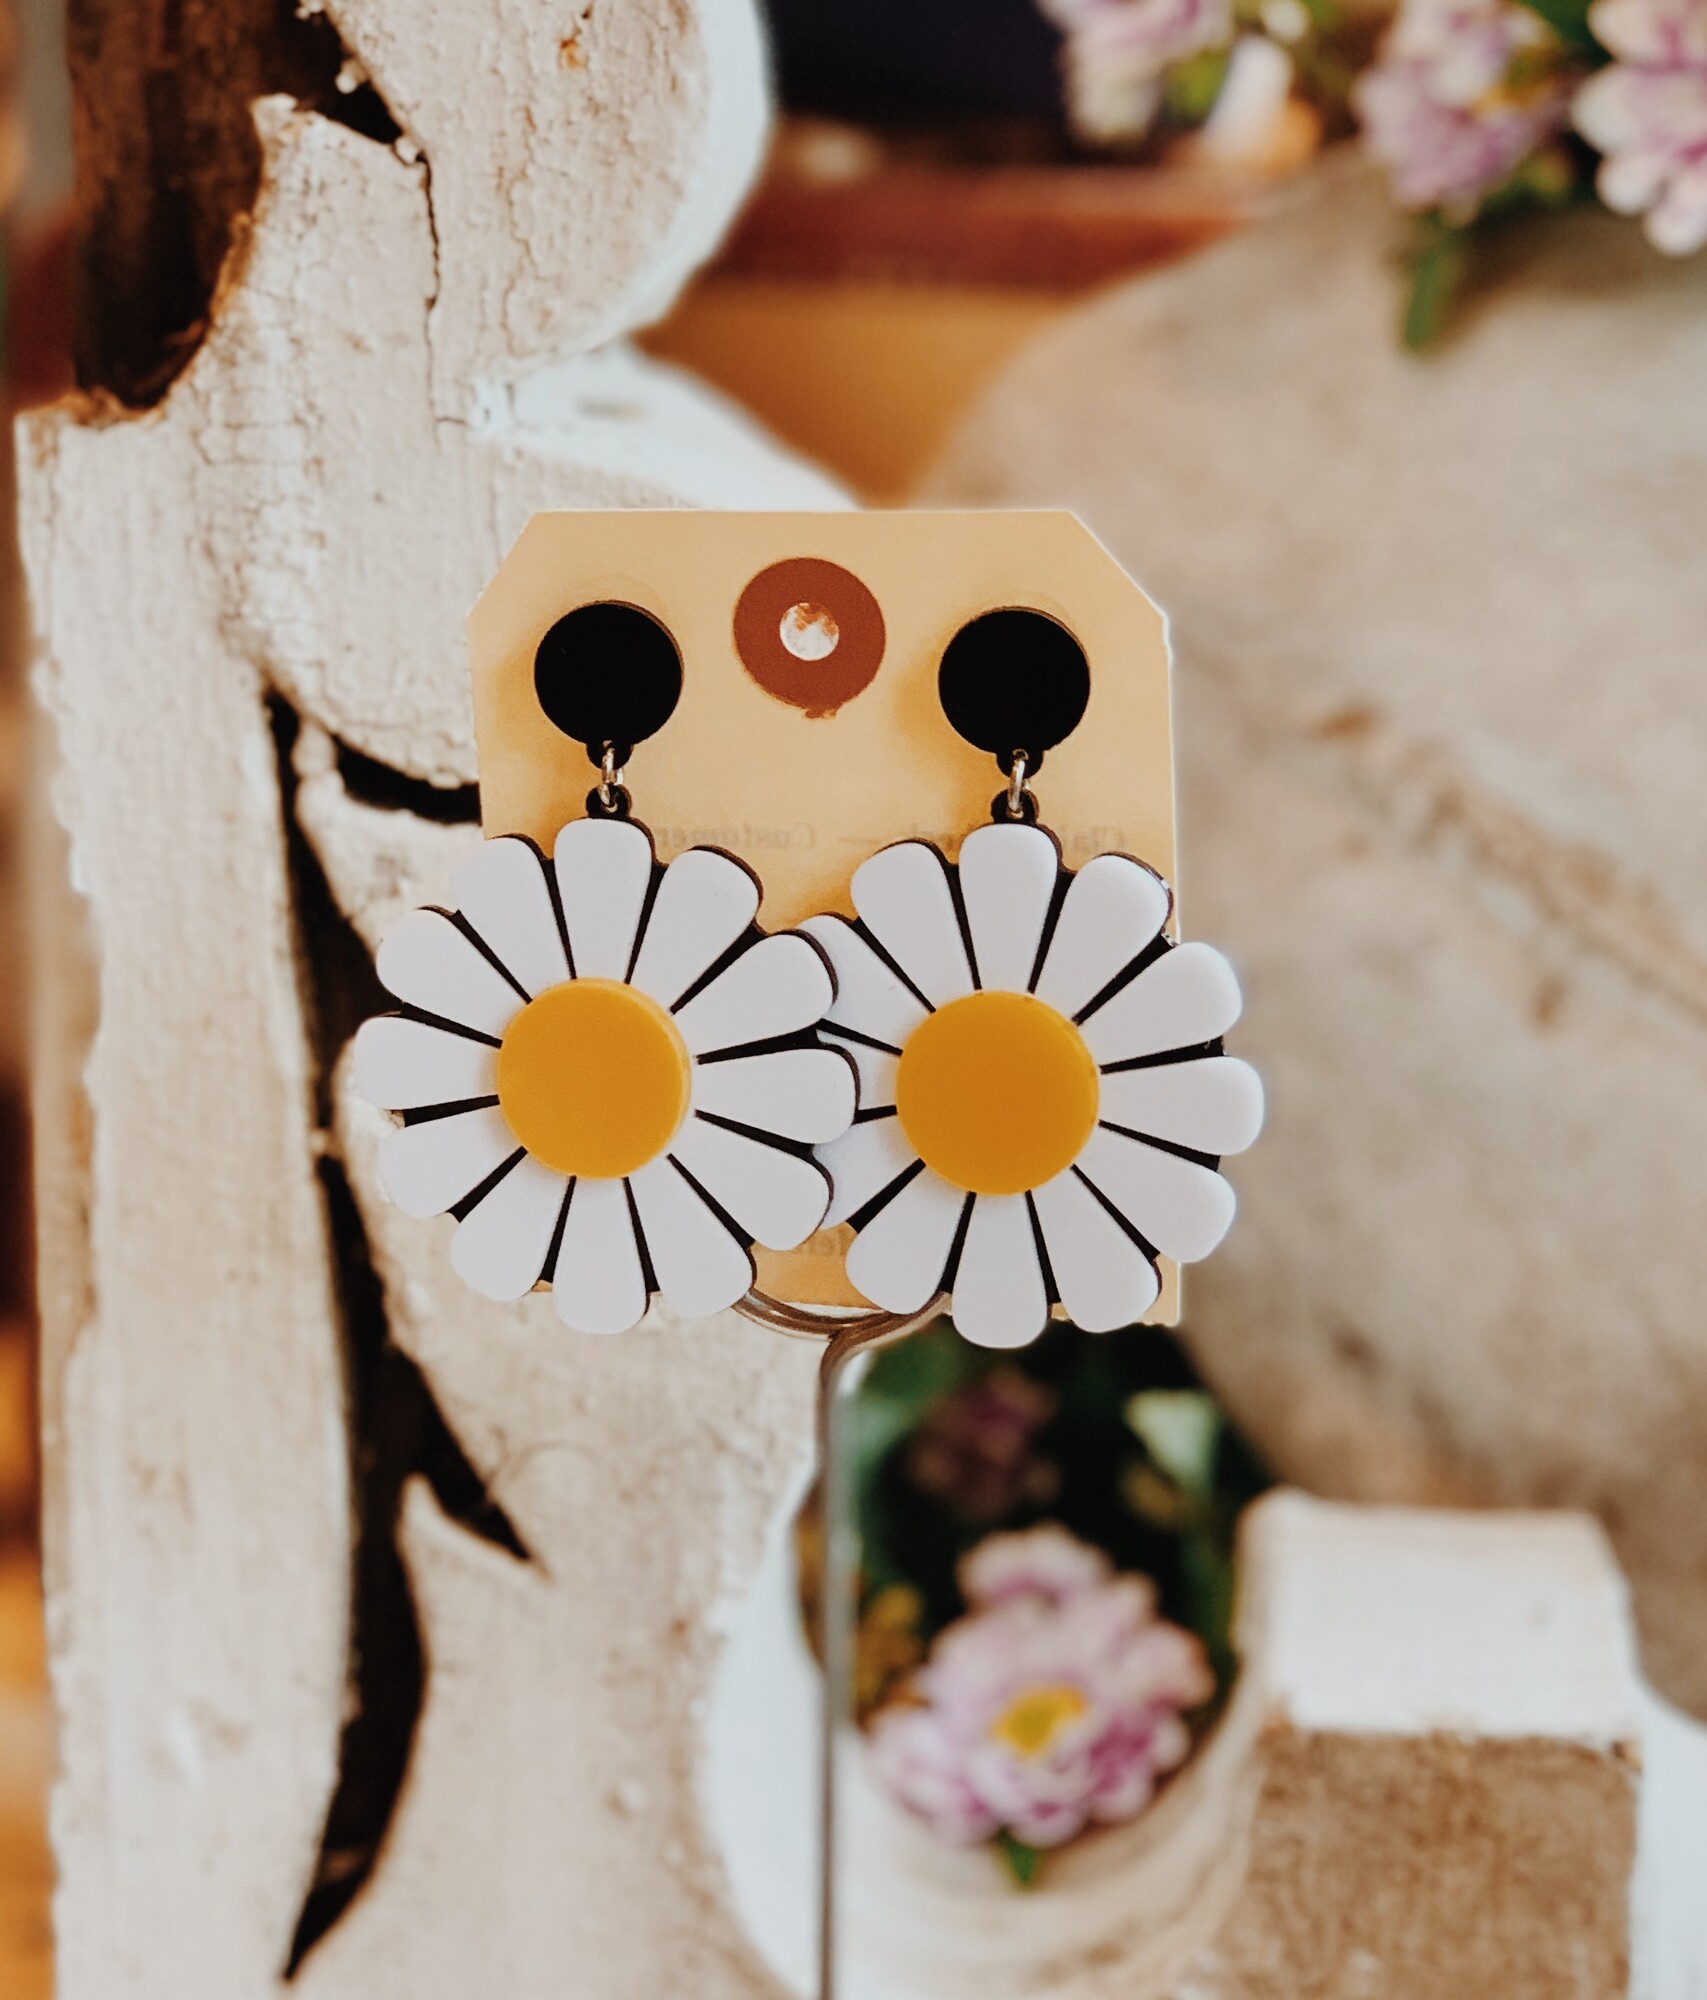 These happy earrings measure 2.5 inches in length. Adding daisies to any outfit will instantly make your day!